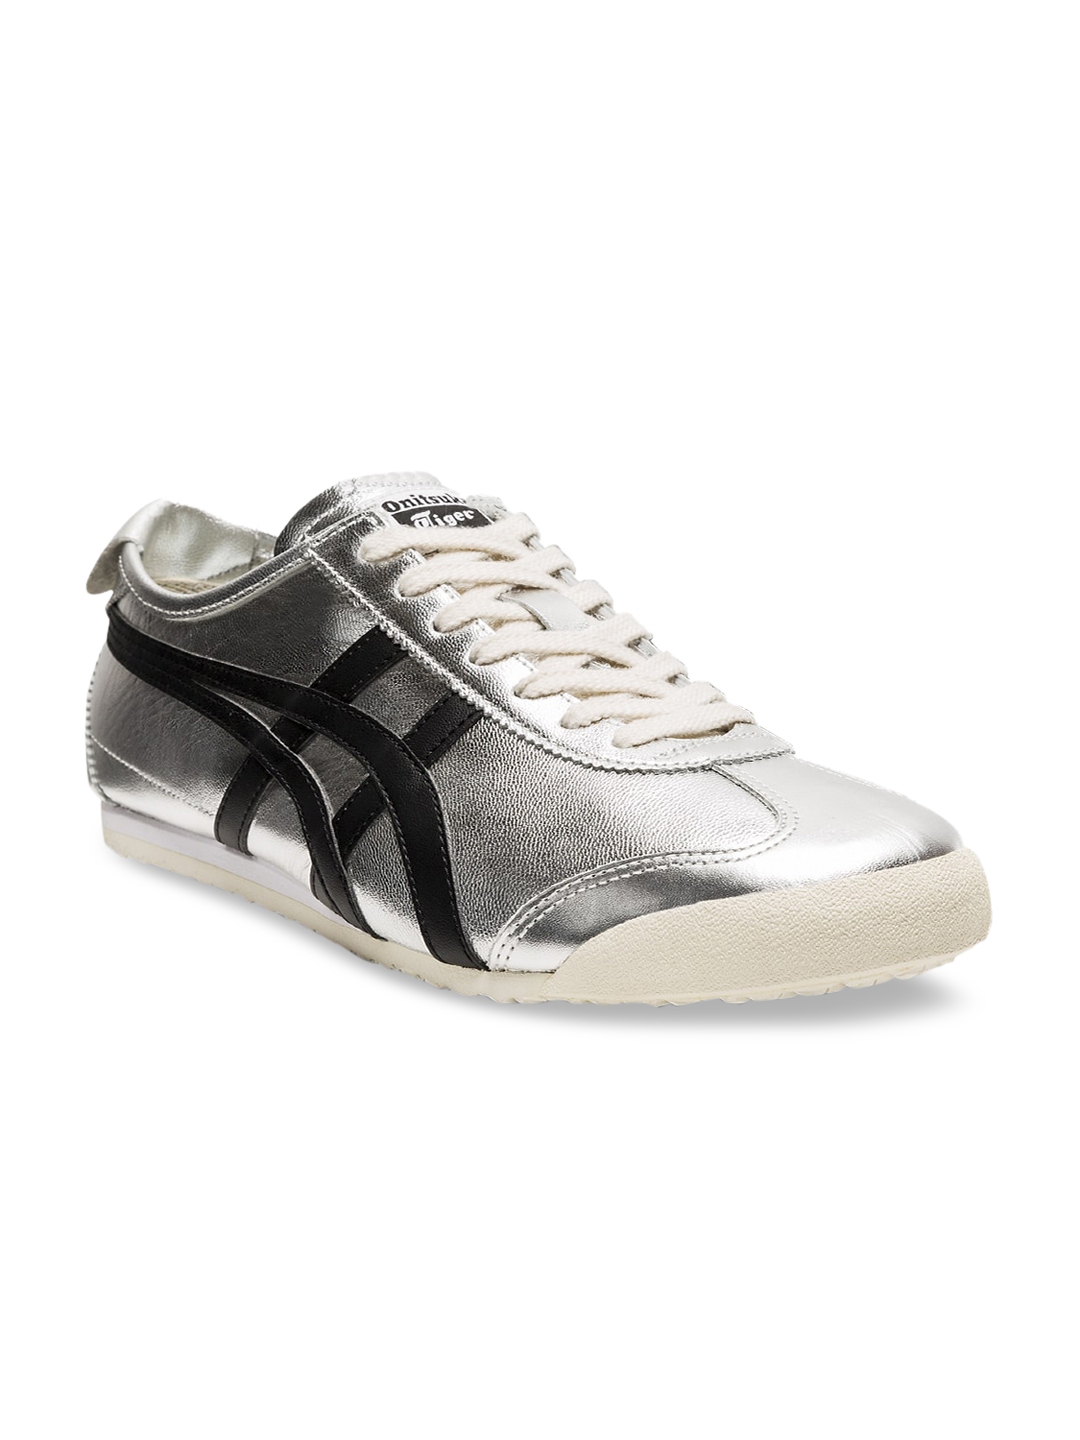 Buy Onitsuka Tiger Unisex Silver Toned Leather Sneakers Mexico 66 ...